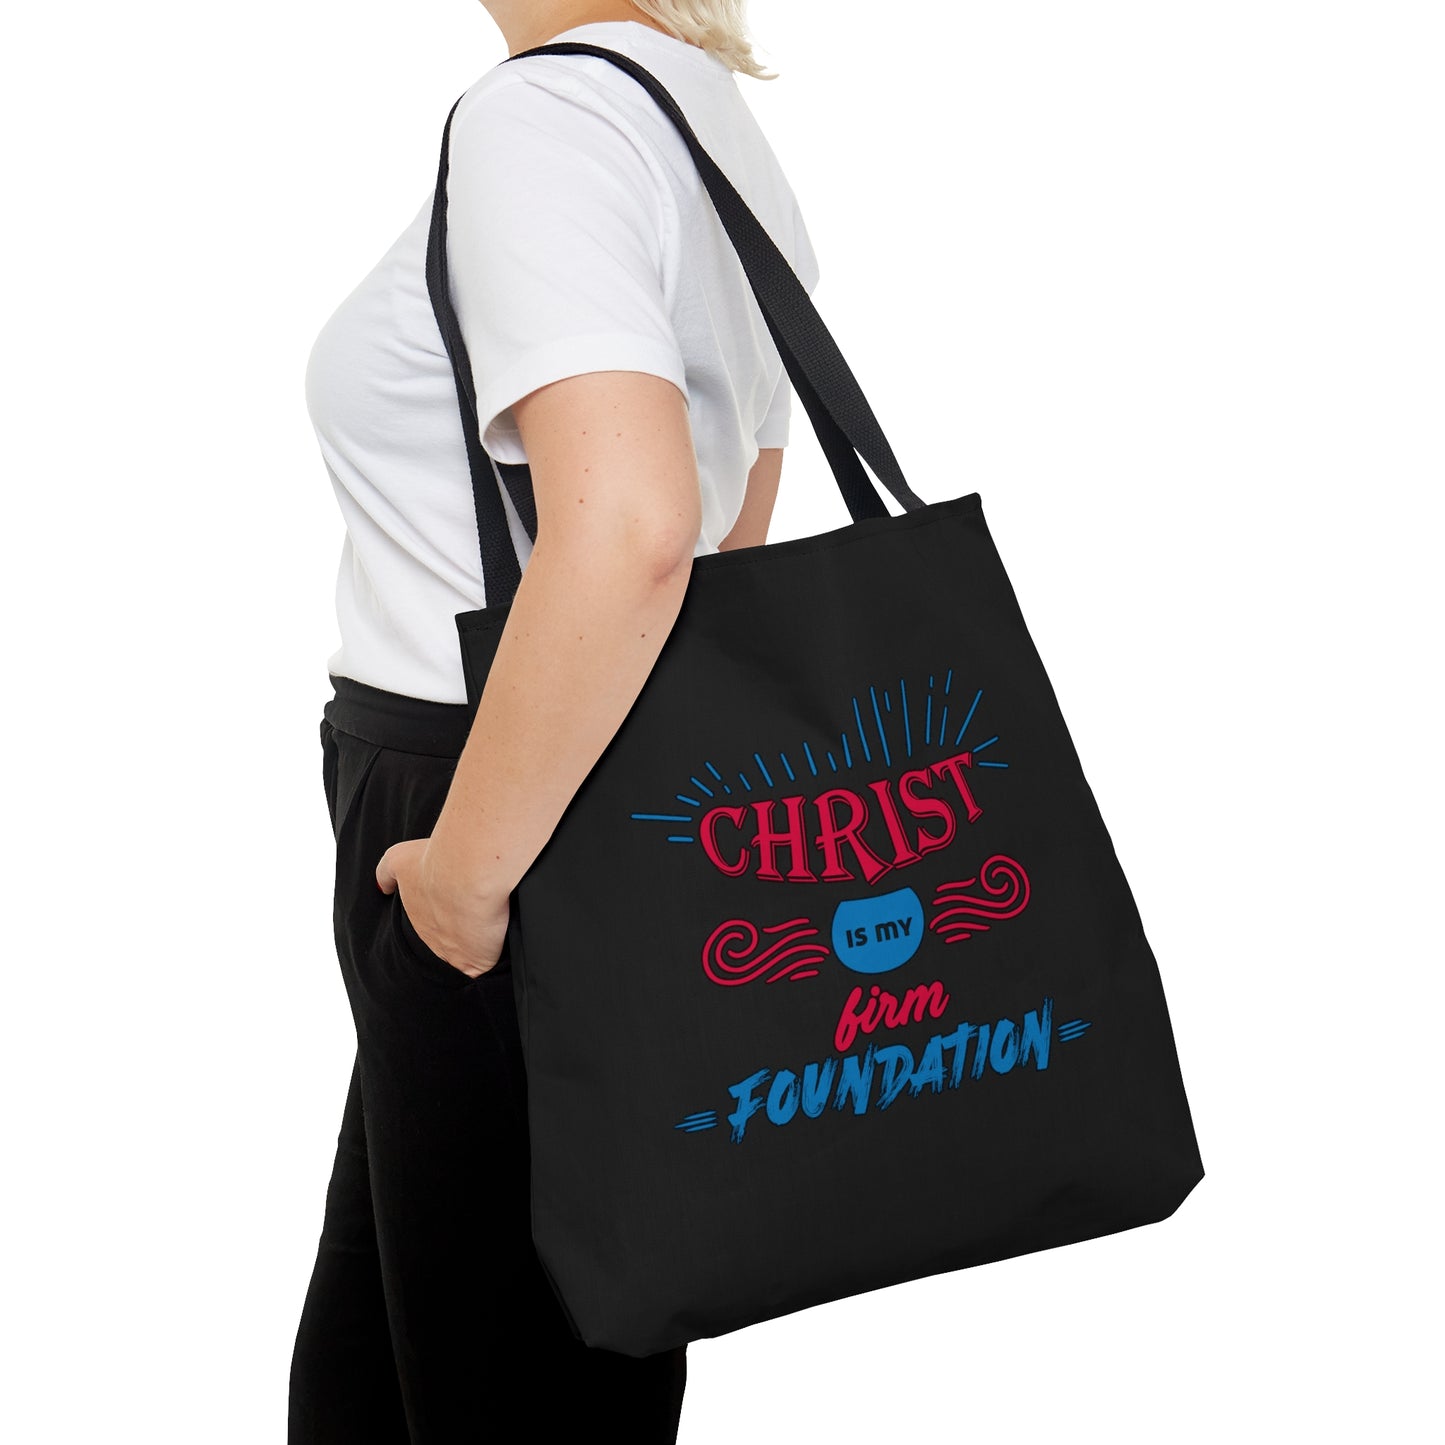 Christ Is My Firm Foundation Tote Bag